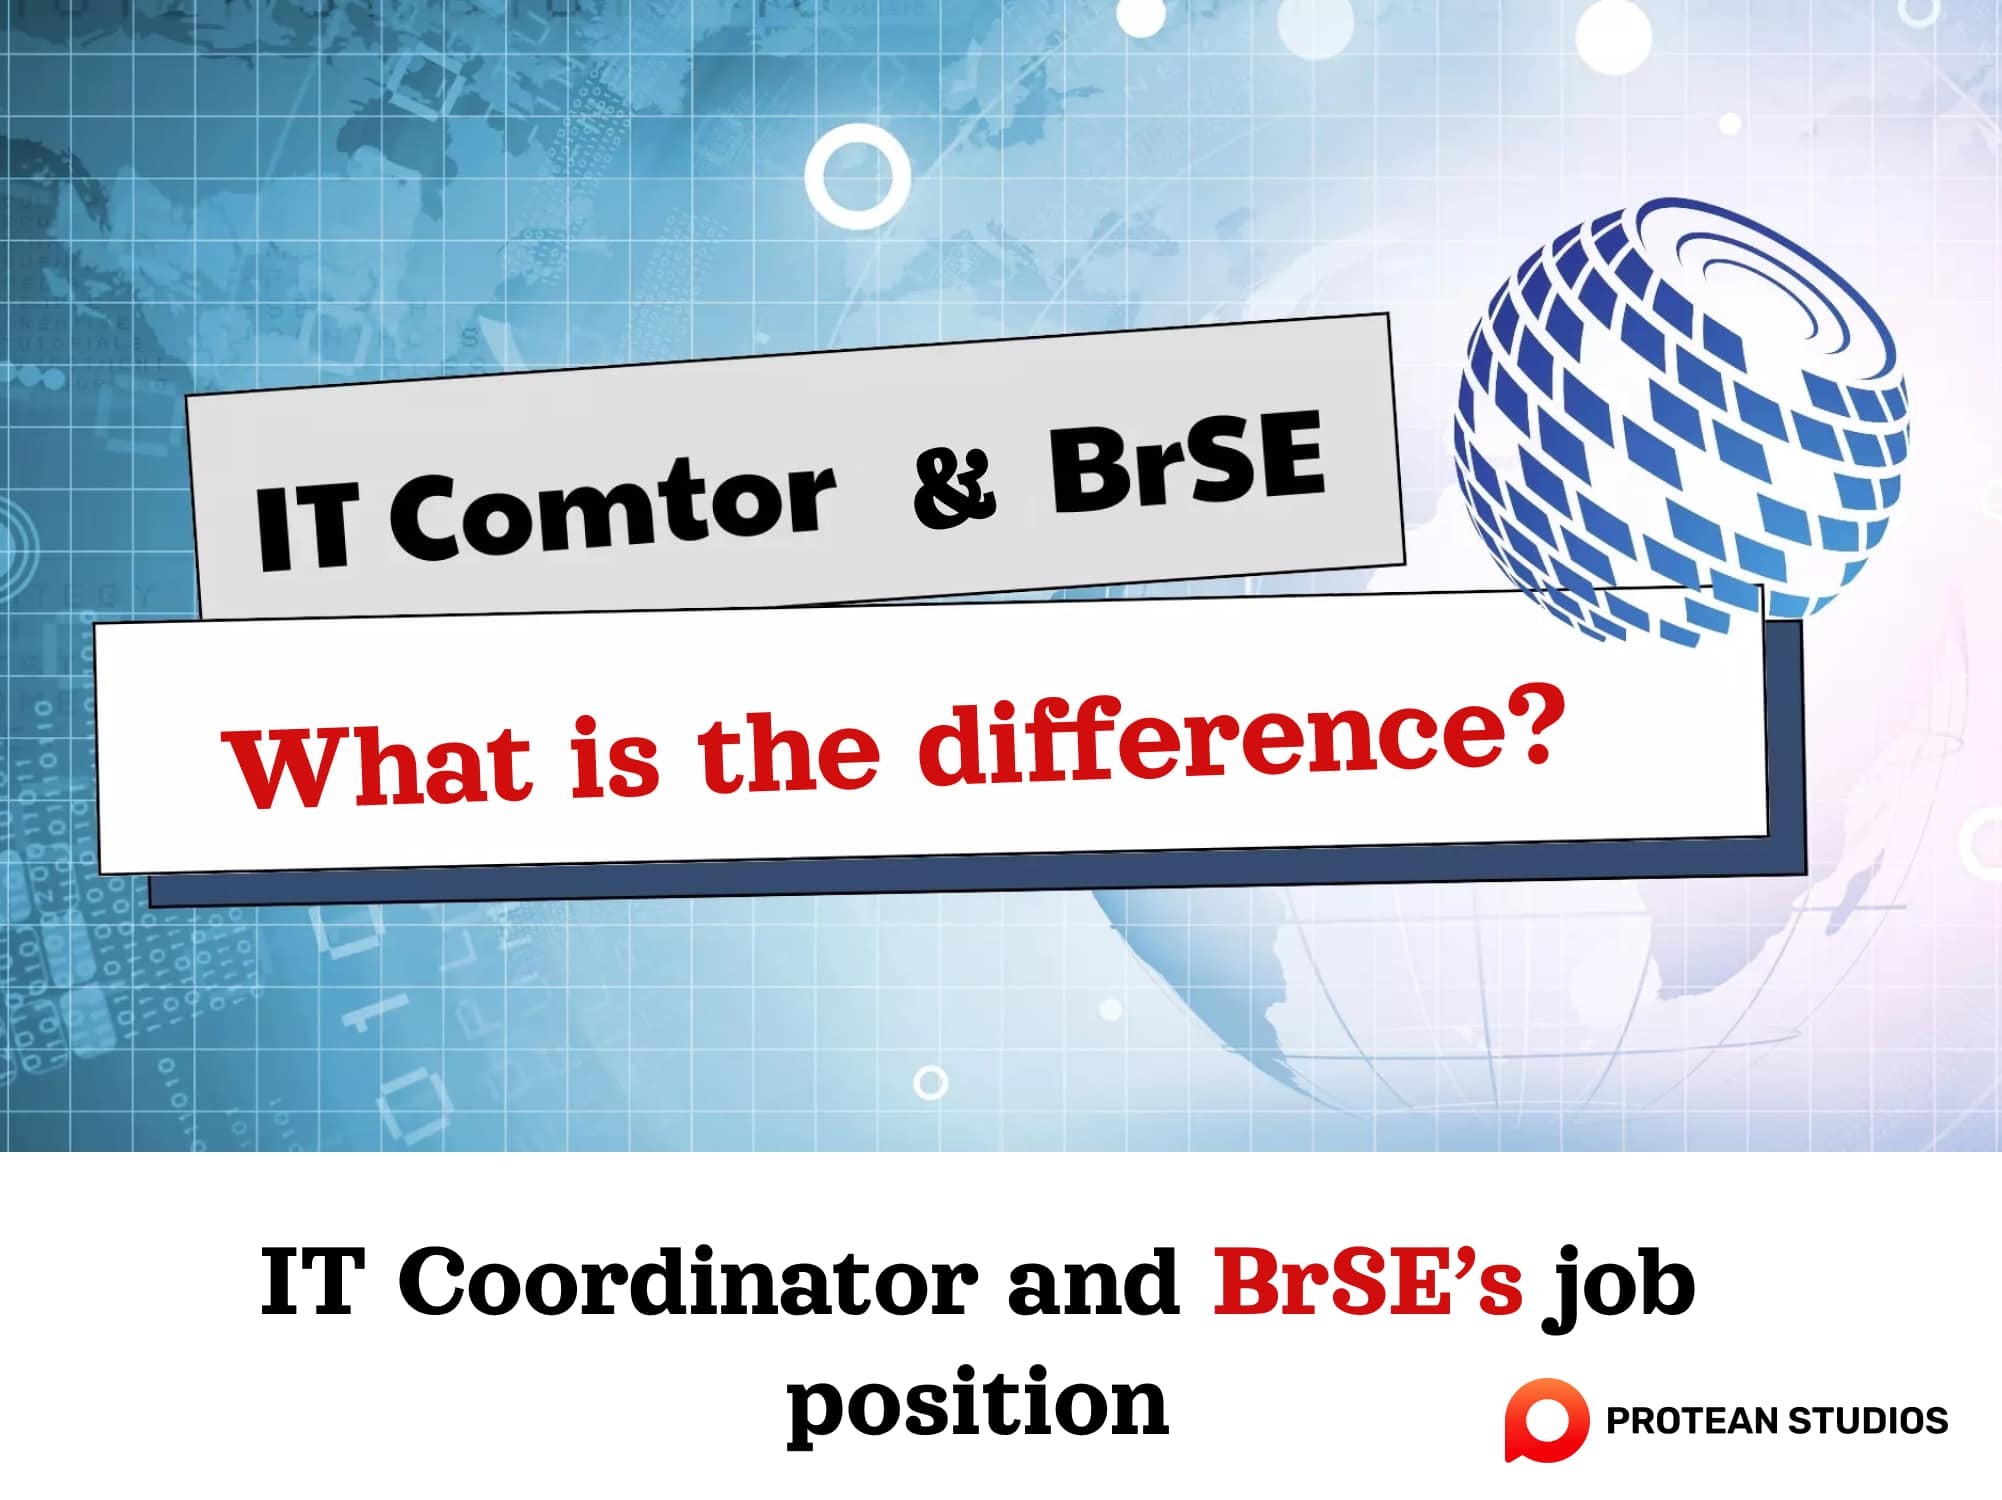 IT Comtor and BrSE job position specifications